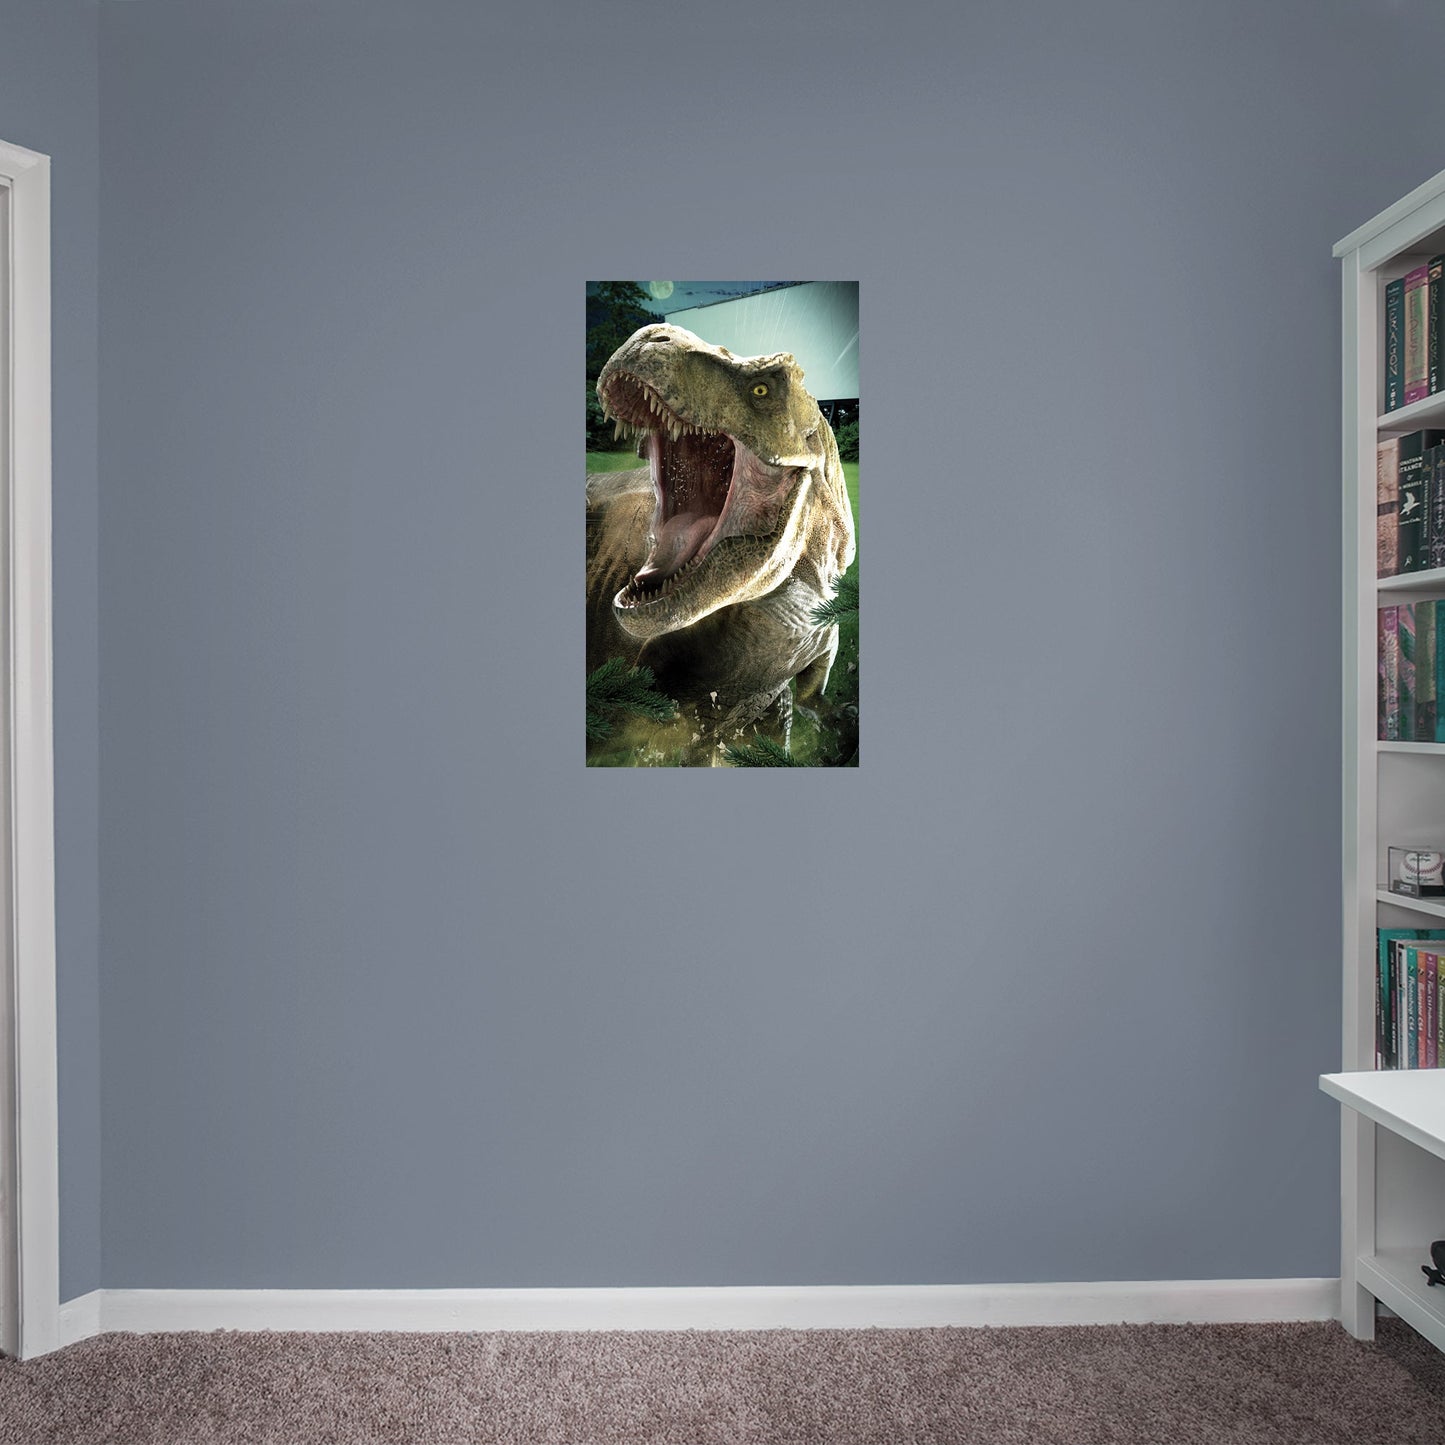 Jurassic World Dominion: T-Rex Drive-In Poster - Officially Licensed NBC Universal Removable Adhesive Decal